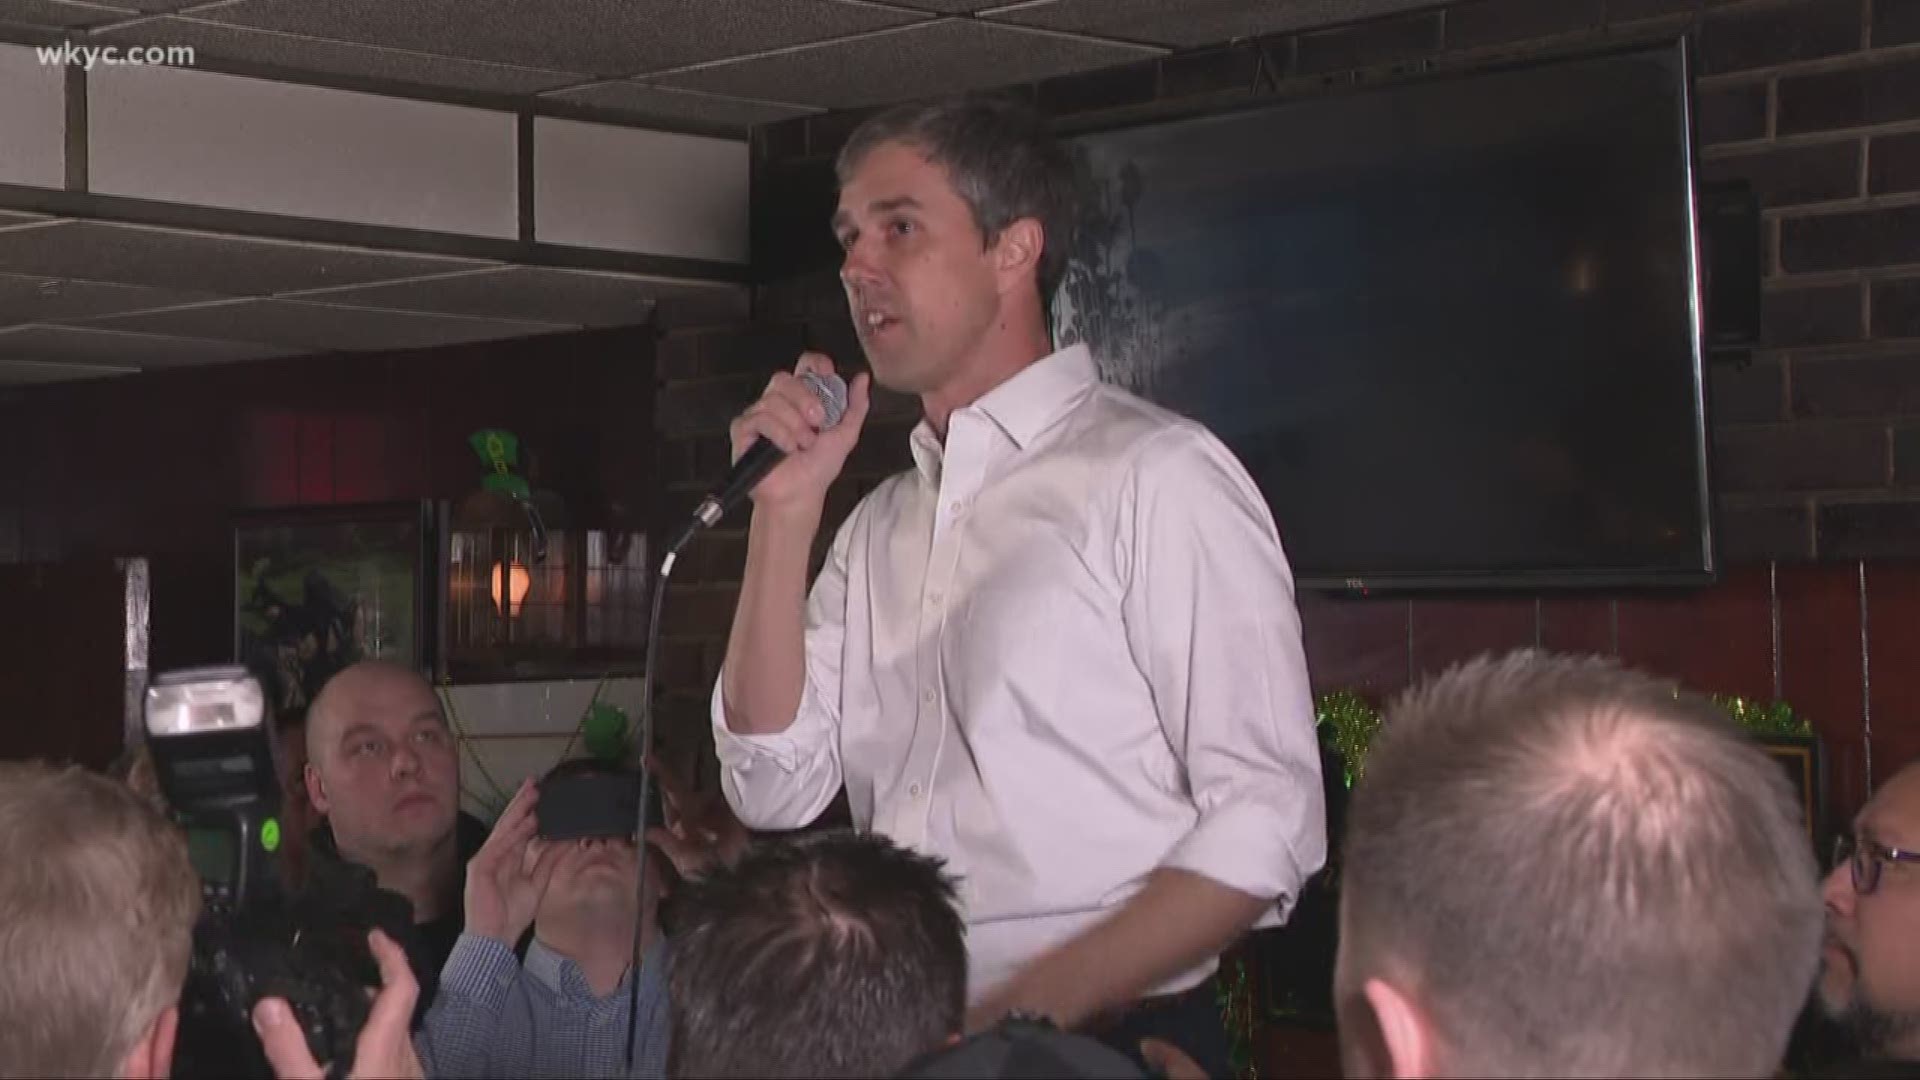 Beto O'Rourke held rally in CLE